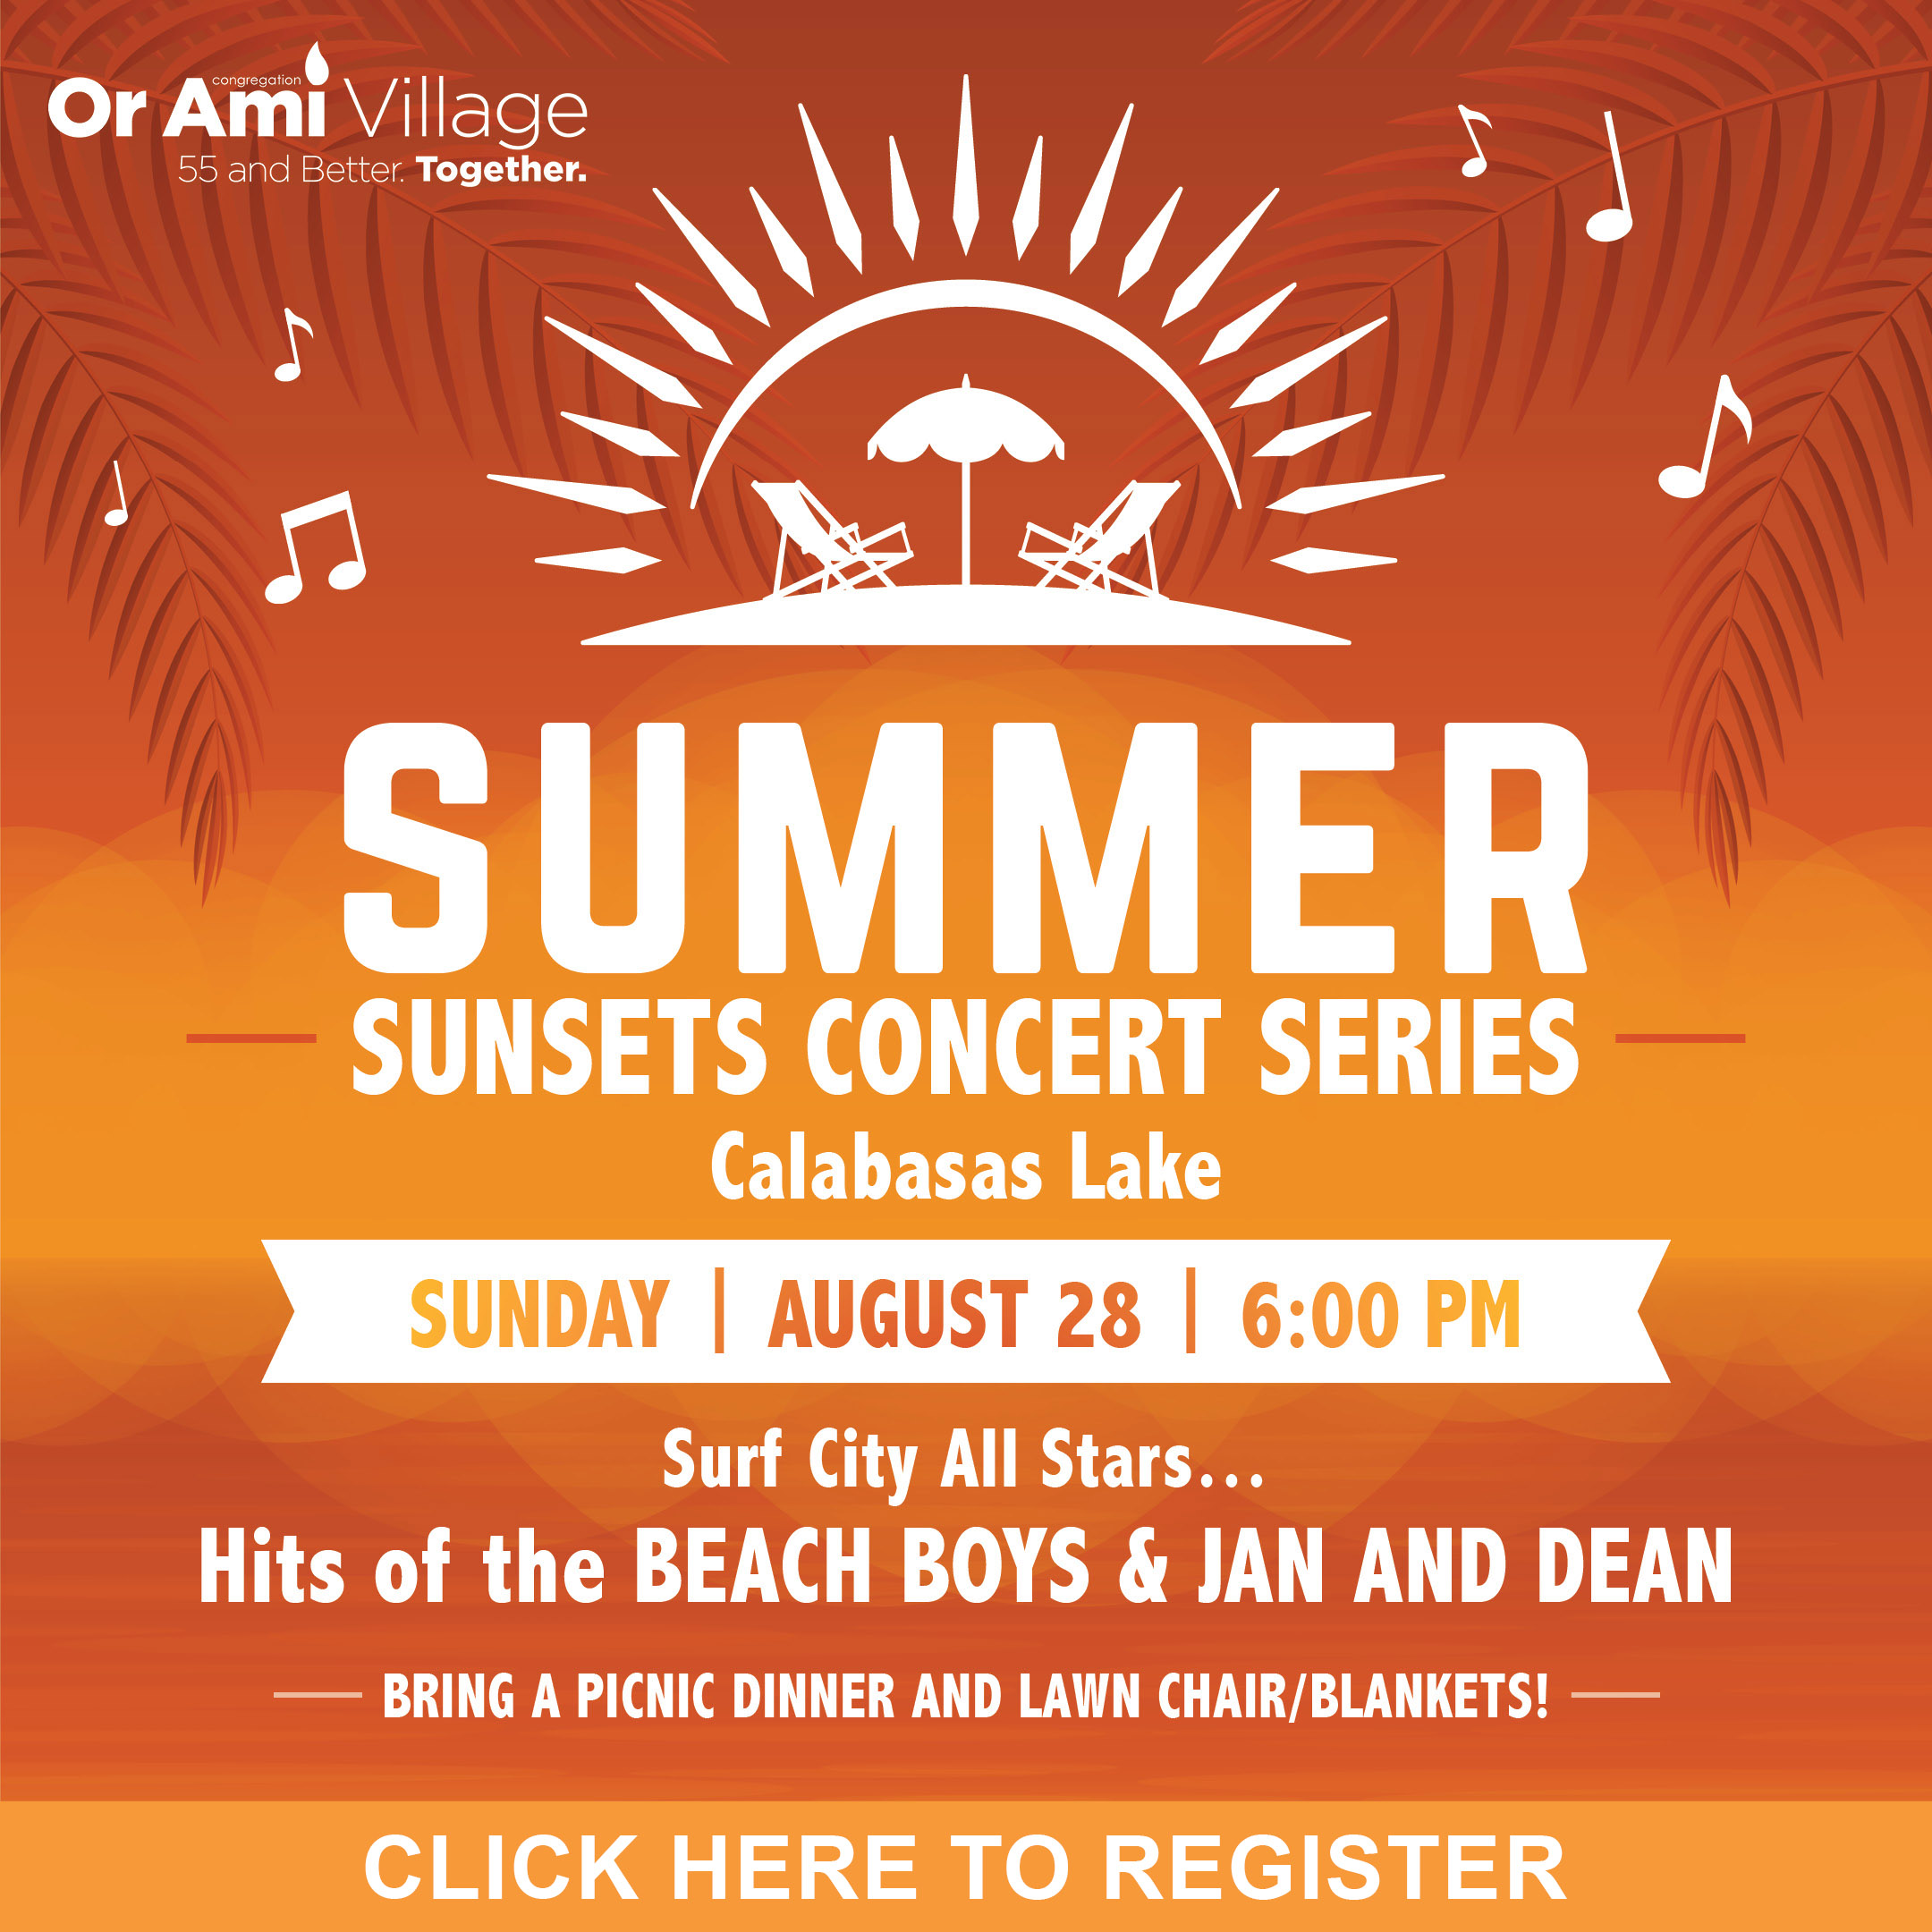 _Or Ami Summer Sunsets Concert Series with CLICK